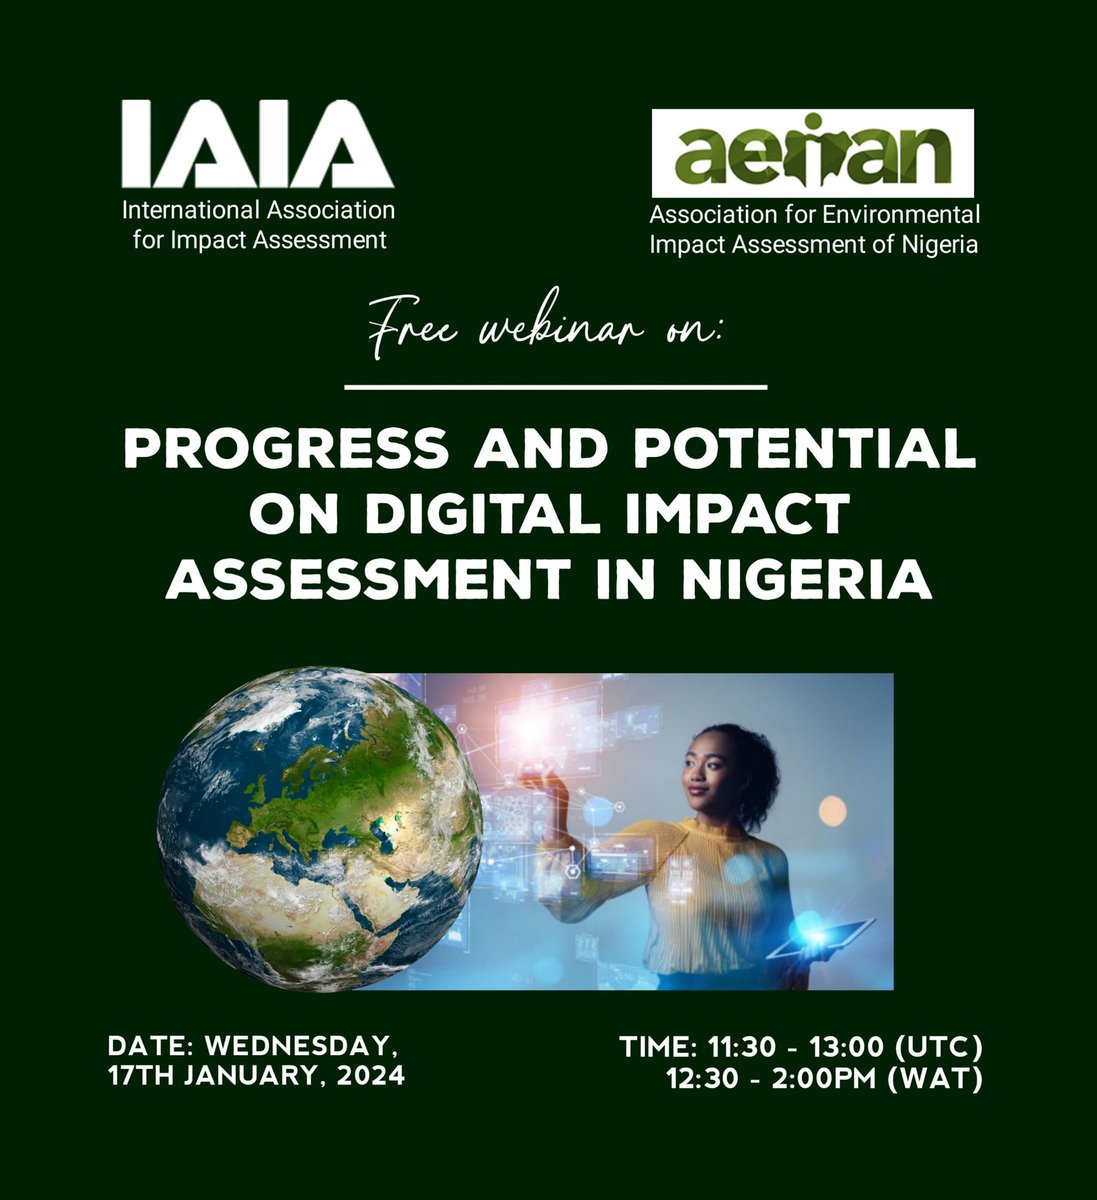 Environmental Assessment Practitioners are invited to join this webinar to learn more about @FMEnvng Digitisation Plan in partnership with @IAIAnetwork @IFC_org for Environmental Assessment in Nigeria. #GreenNigeria mailchi.mp/40dc3bfe85de/i…